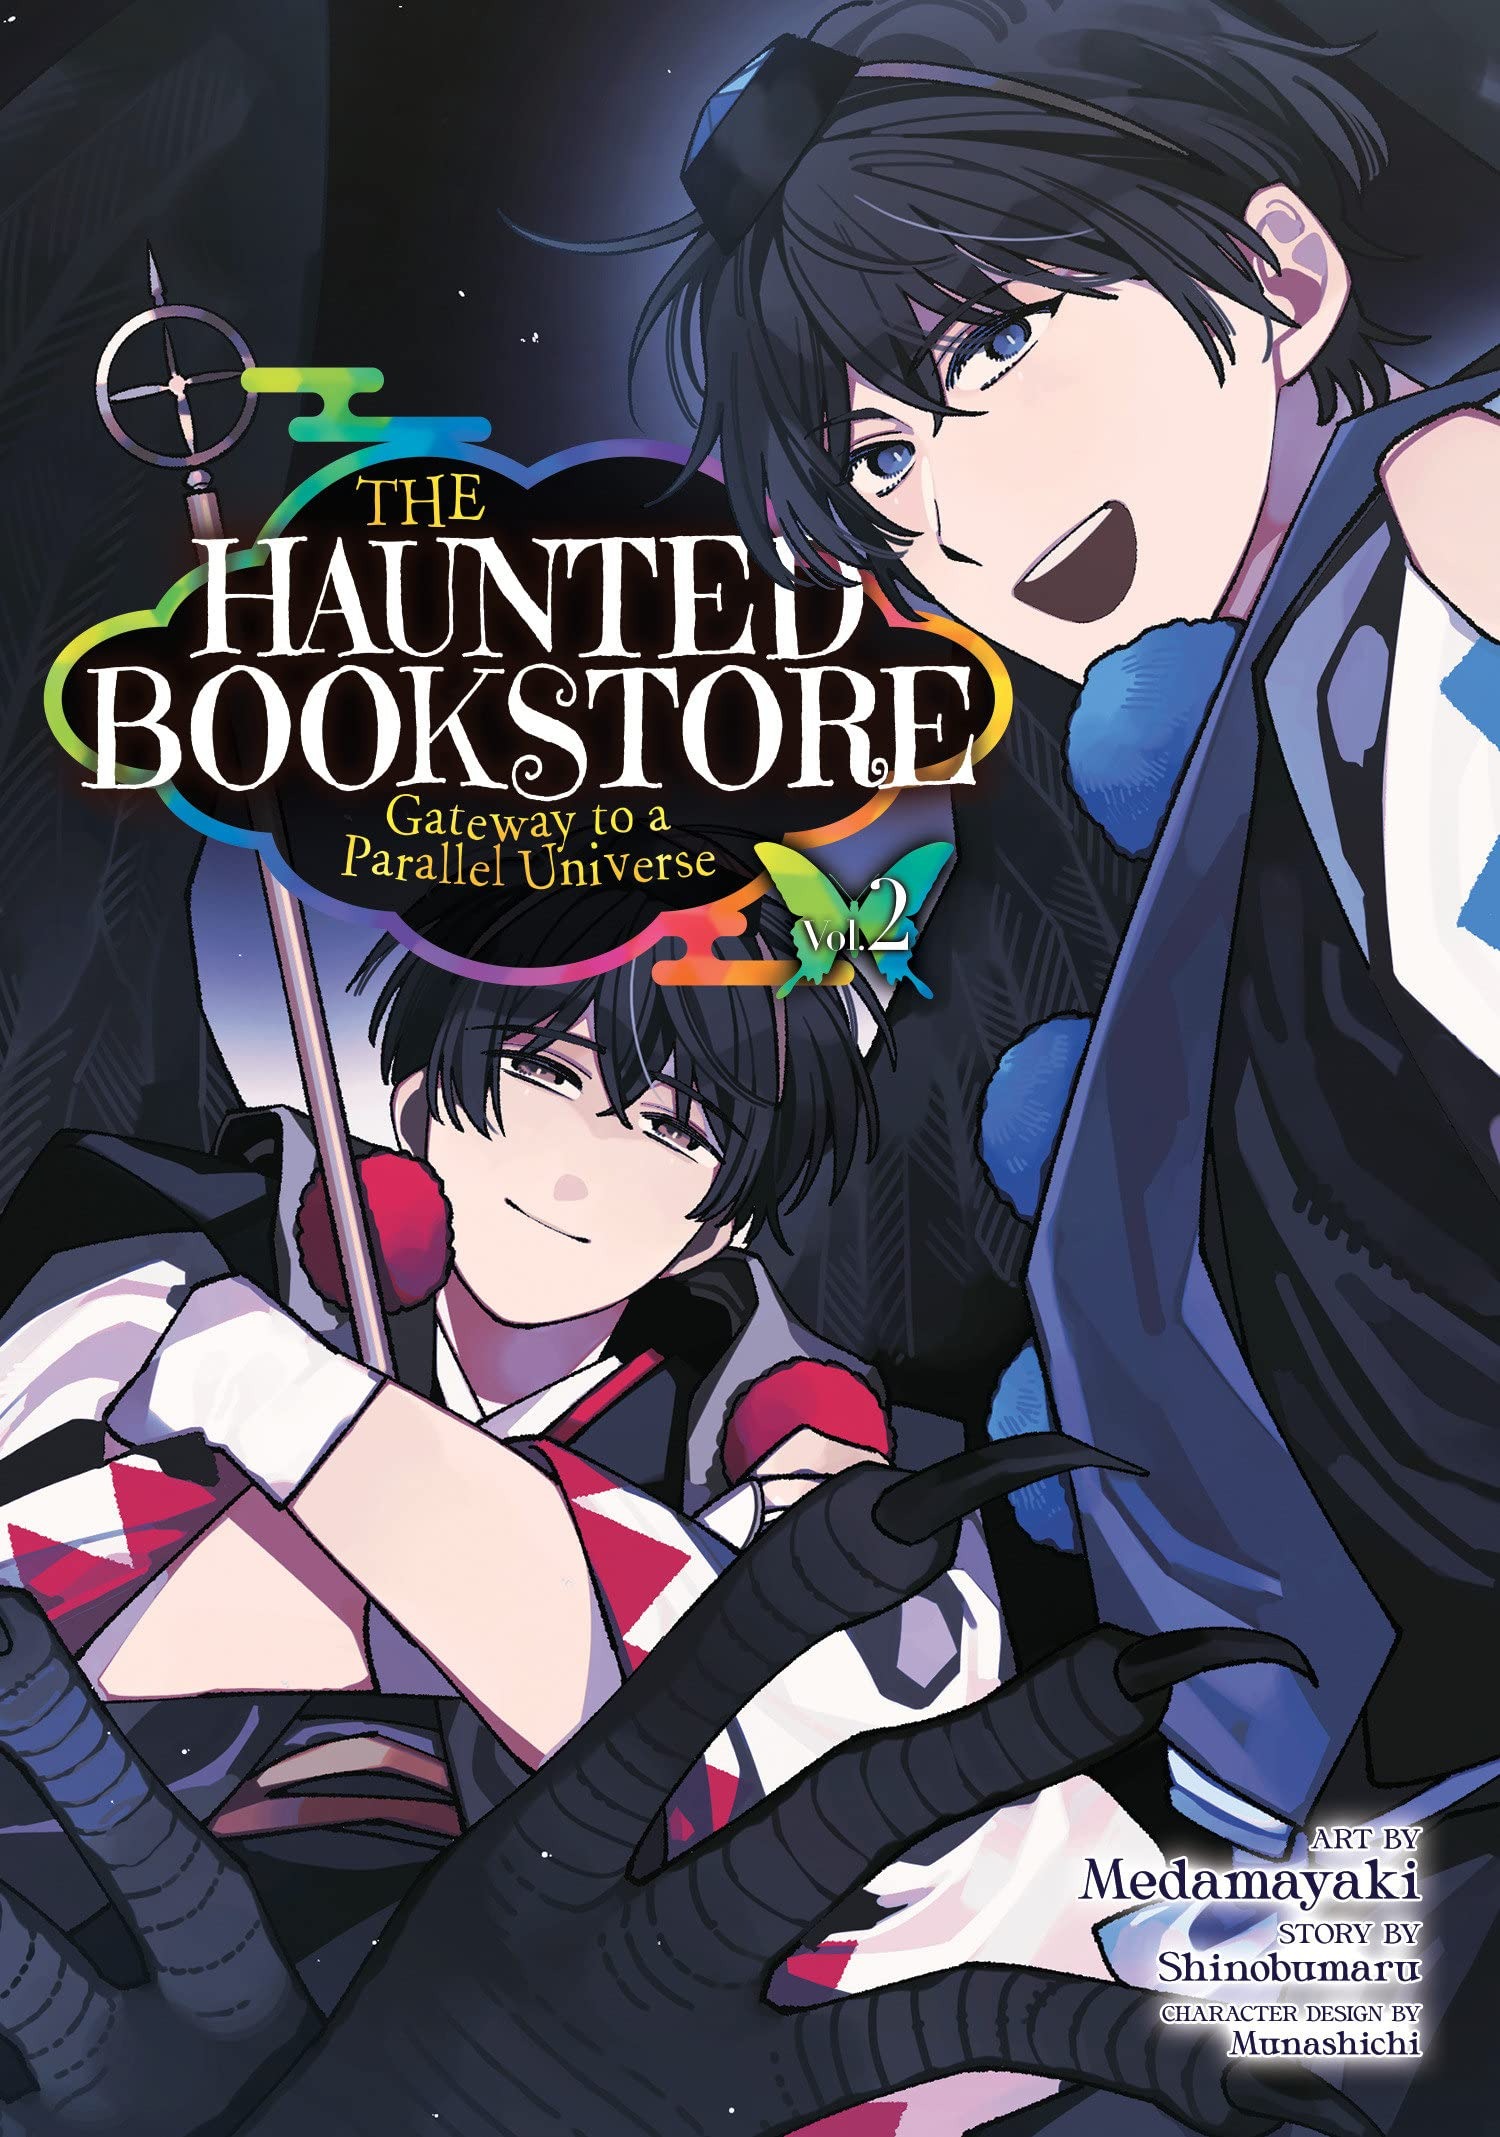 The Haunted Bookstore Gateway to a Parallel Universe Manga Volume 2